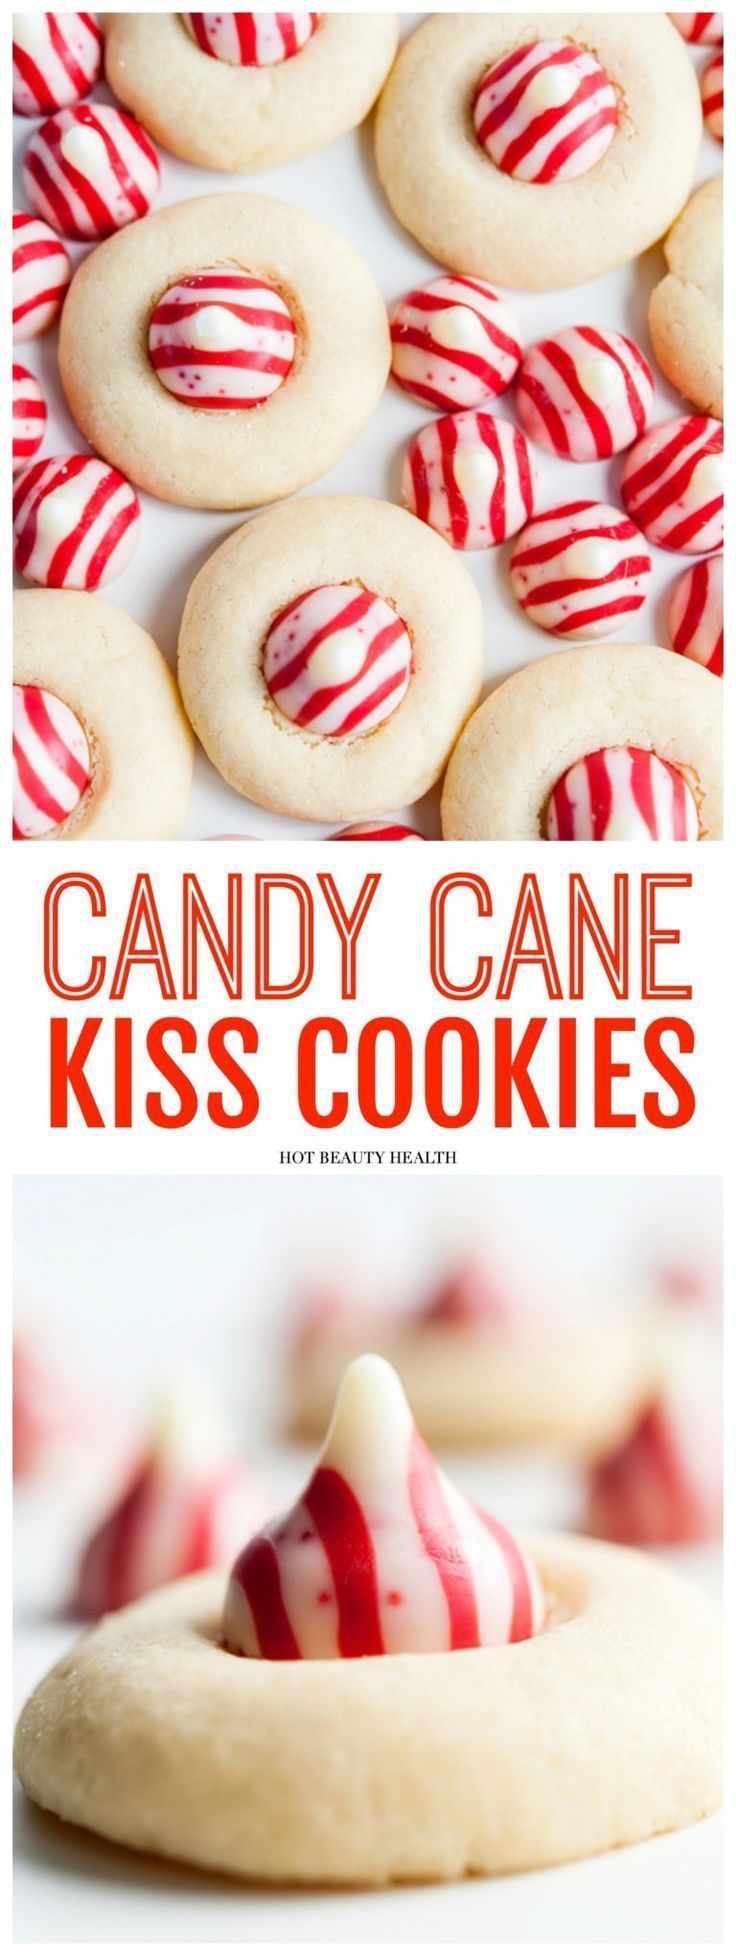 Candy Cane Kiss Cookies Recipe - Hot Beauty Health -   19 holiday Cookies party ideas